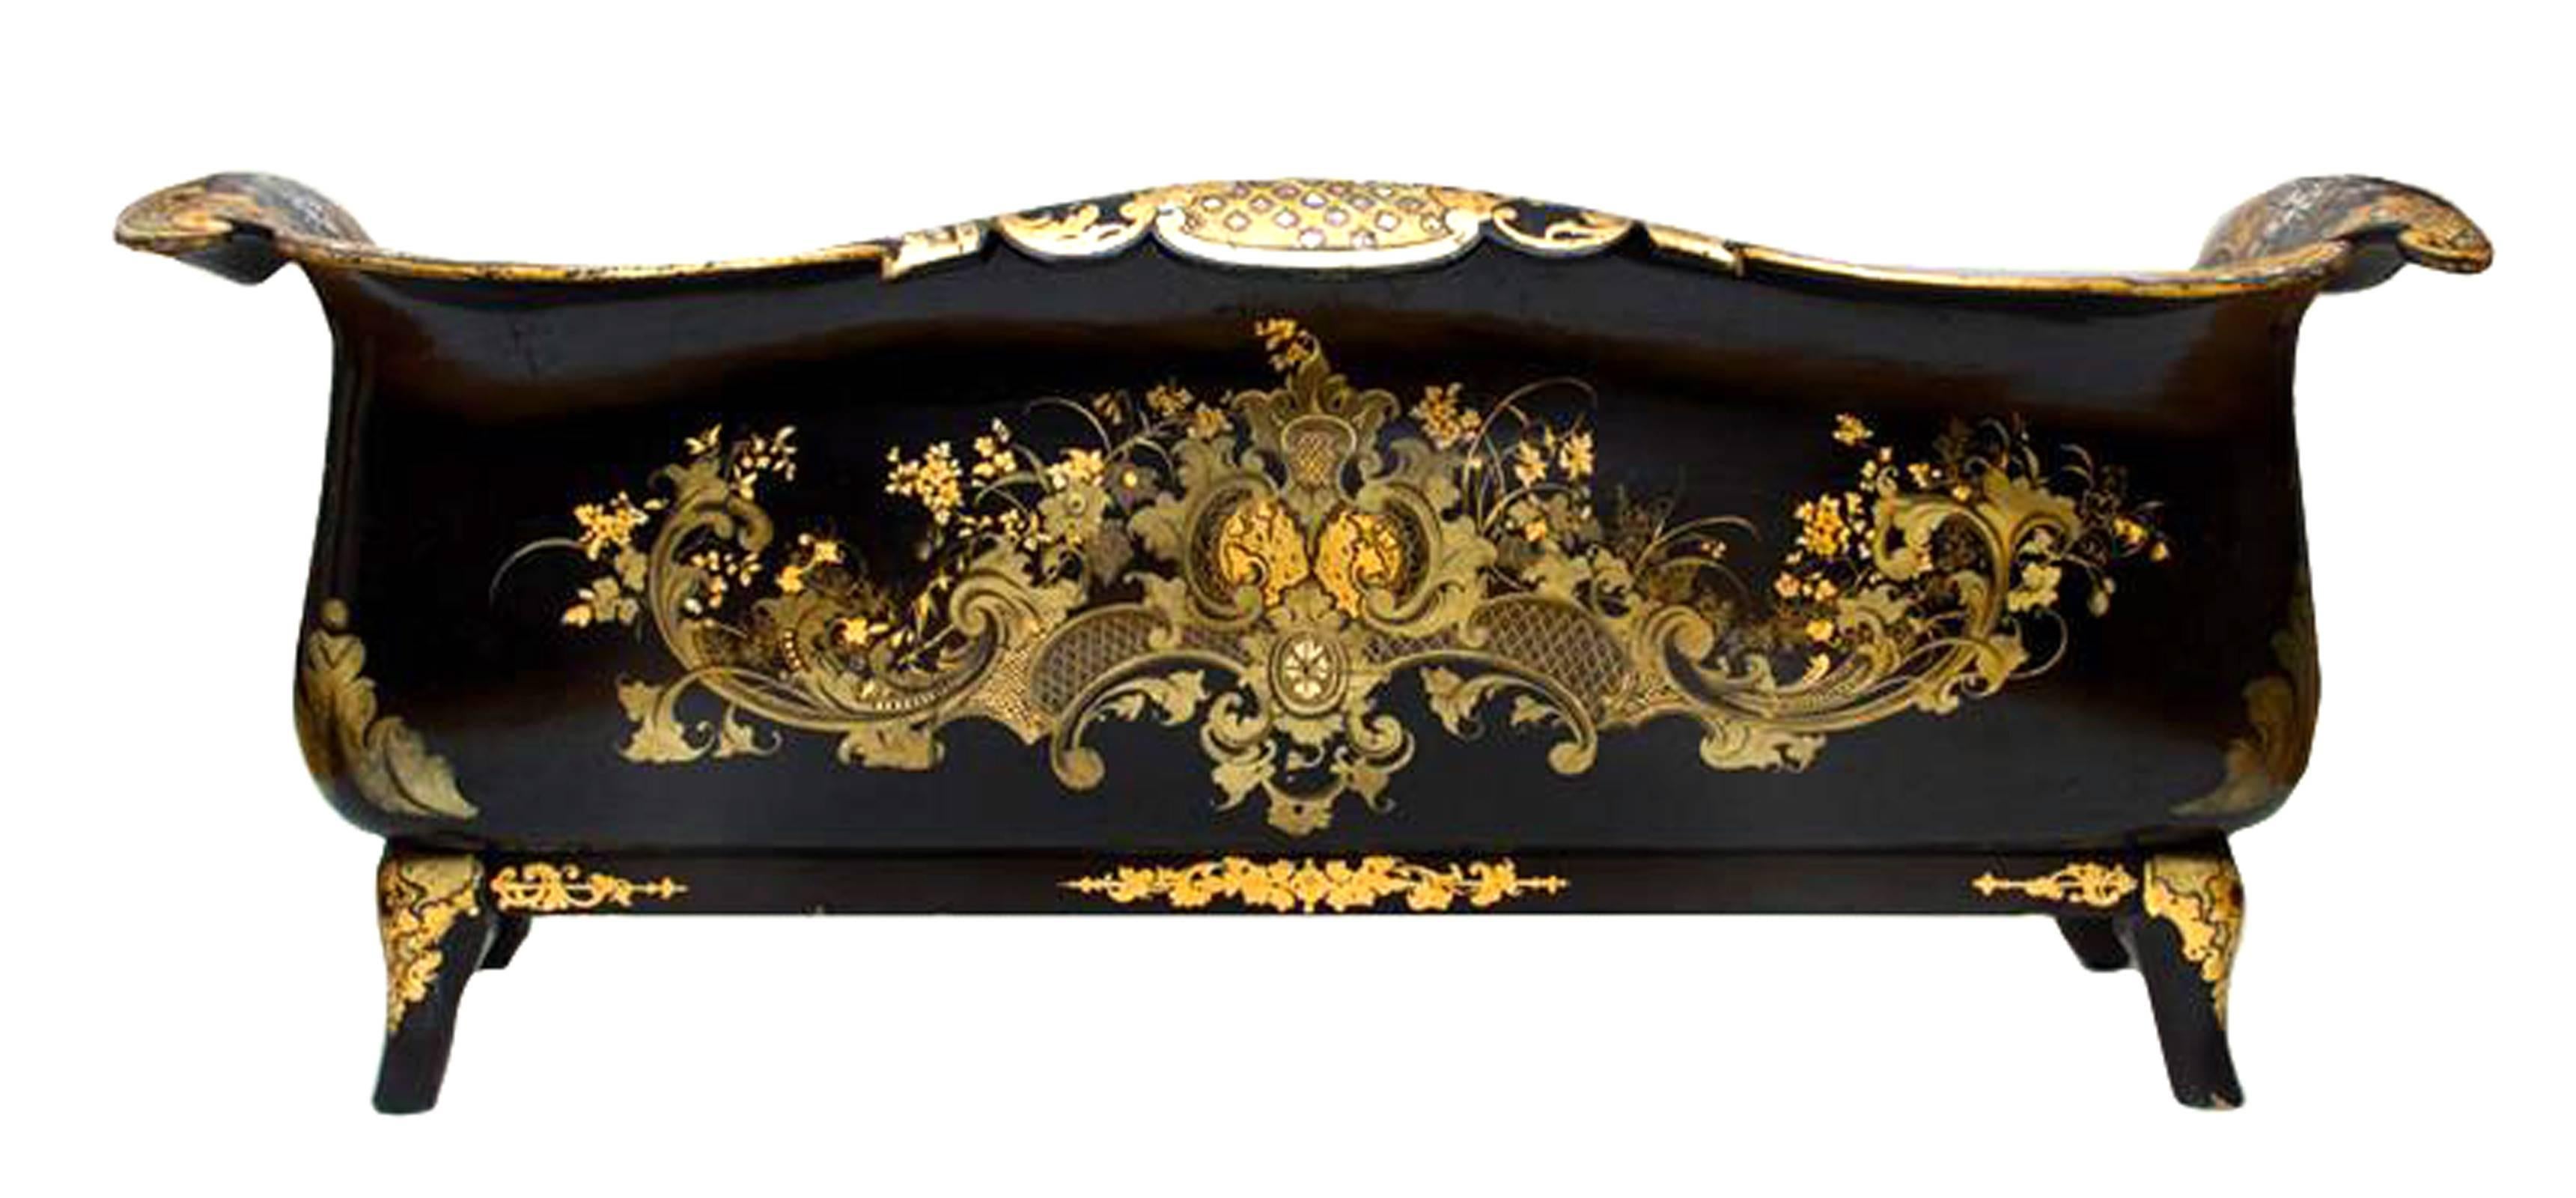 Early Victorian Parcel-Gilt & Mother-of-Pearl Inlaid Papier Mâché Settee by Jennens & Bettridge